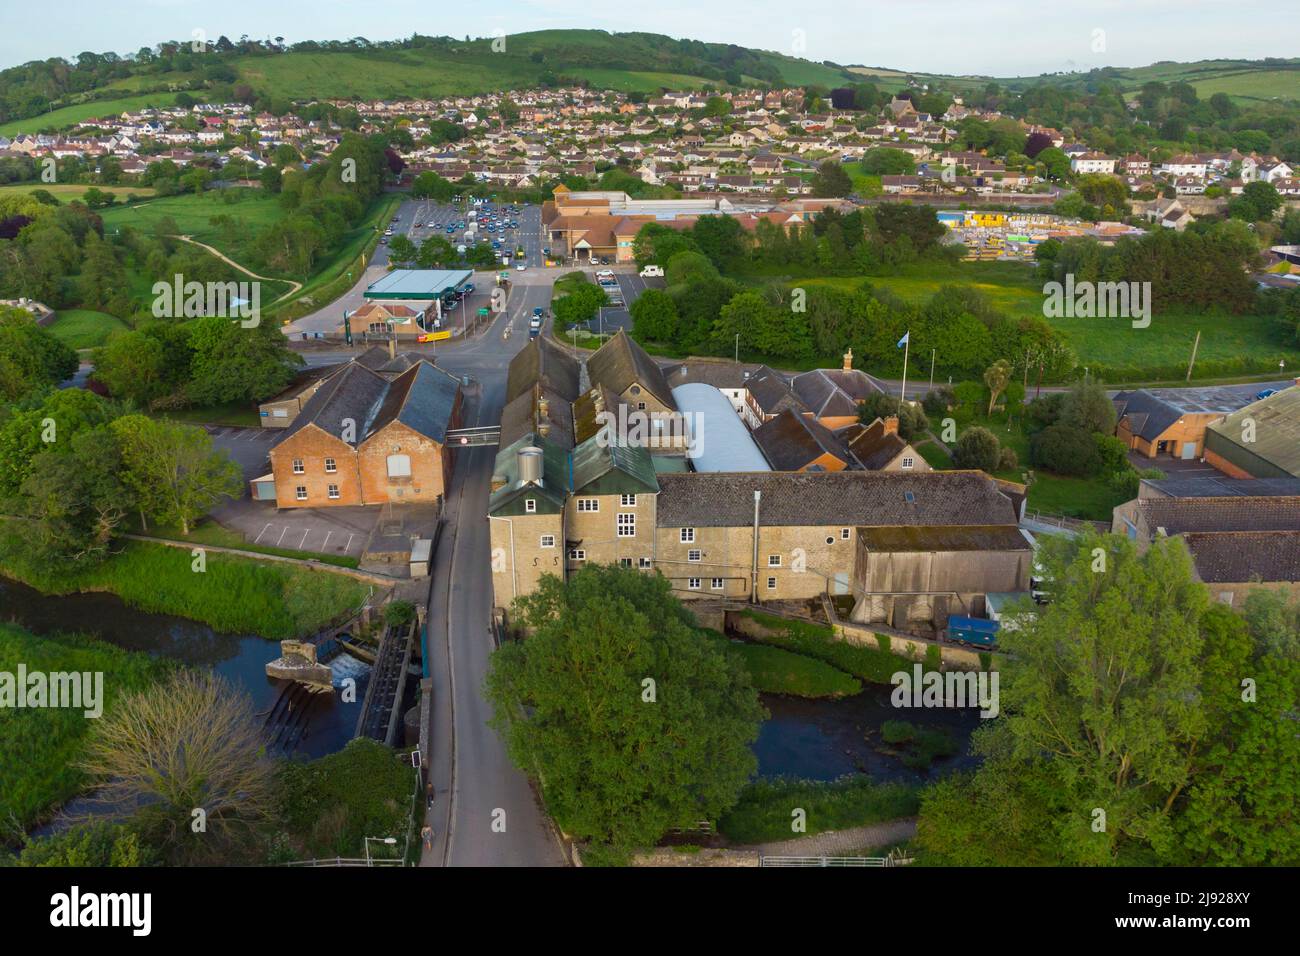 General view from the air of the historic JC & RH Palmers Ltd The Old Brewery which sits next to the river Brit at Bridport in Dorset.  The brewery wa Stock Photo